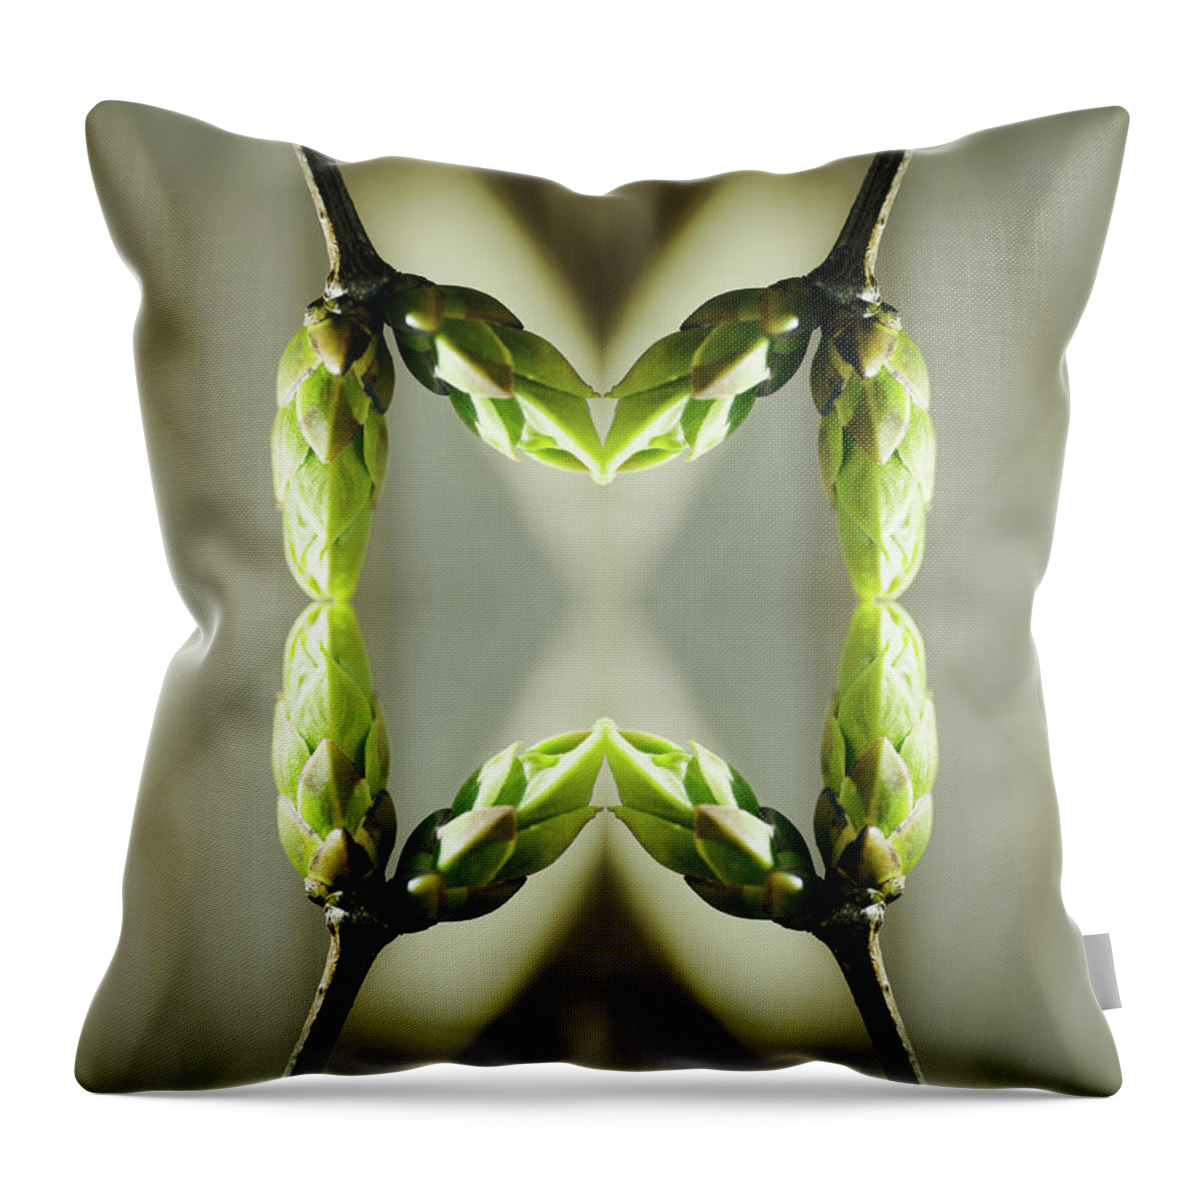 Bud Throw Pillow featuring the photograph Syringa Buds by Silvia Otte